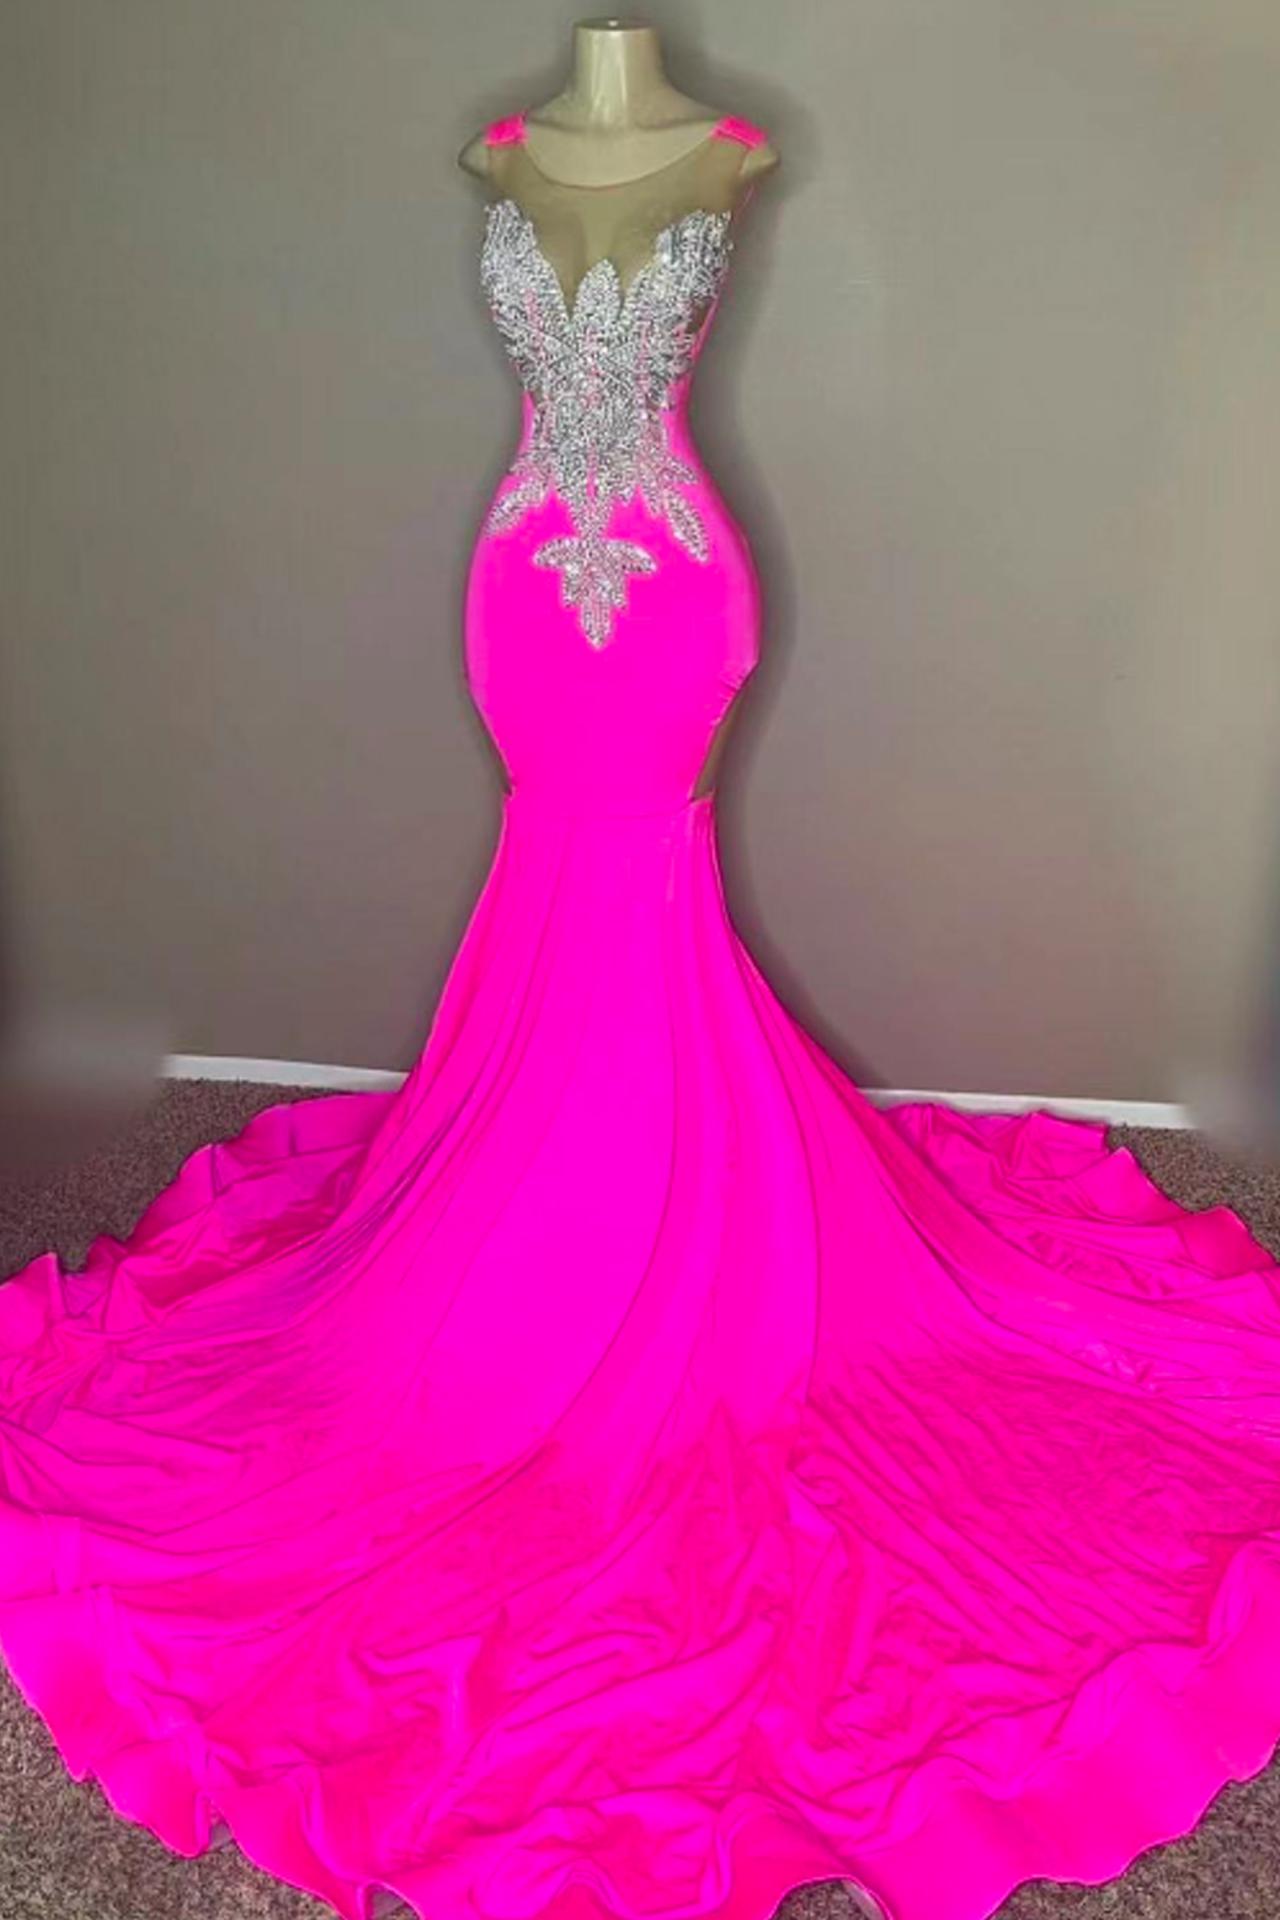 Vestidos Mujer Para, Pink Prom Dresses, Beaded Applique Prom Dresses, Luxury Birthday Party Dresses, Fashion Party Dresses, Elegant Evening